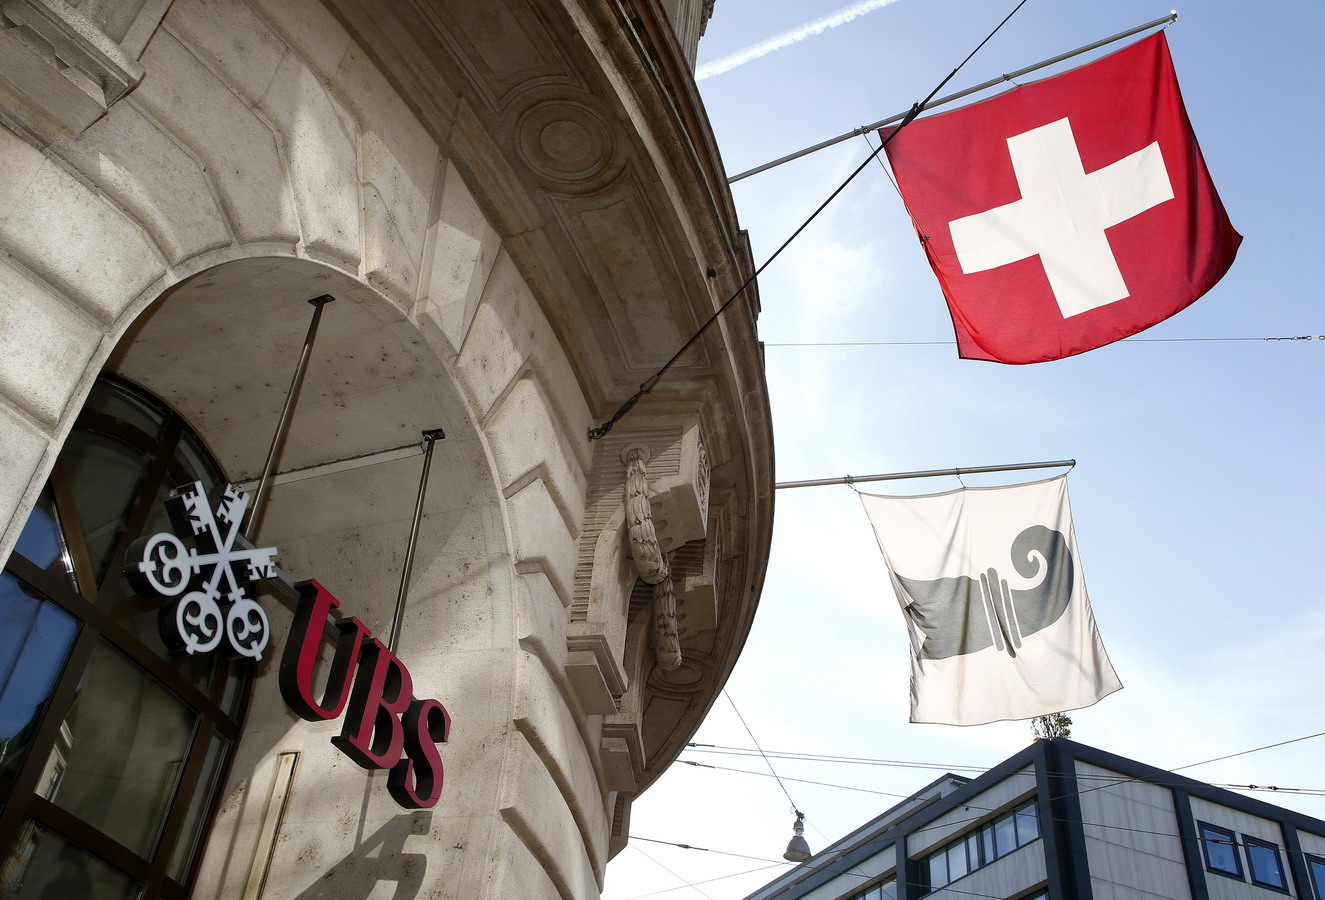 A Swiss national flag and a flag of the city of Basel fly over the entrance of a branch office of Swiss bank UBS in Basel